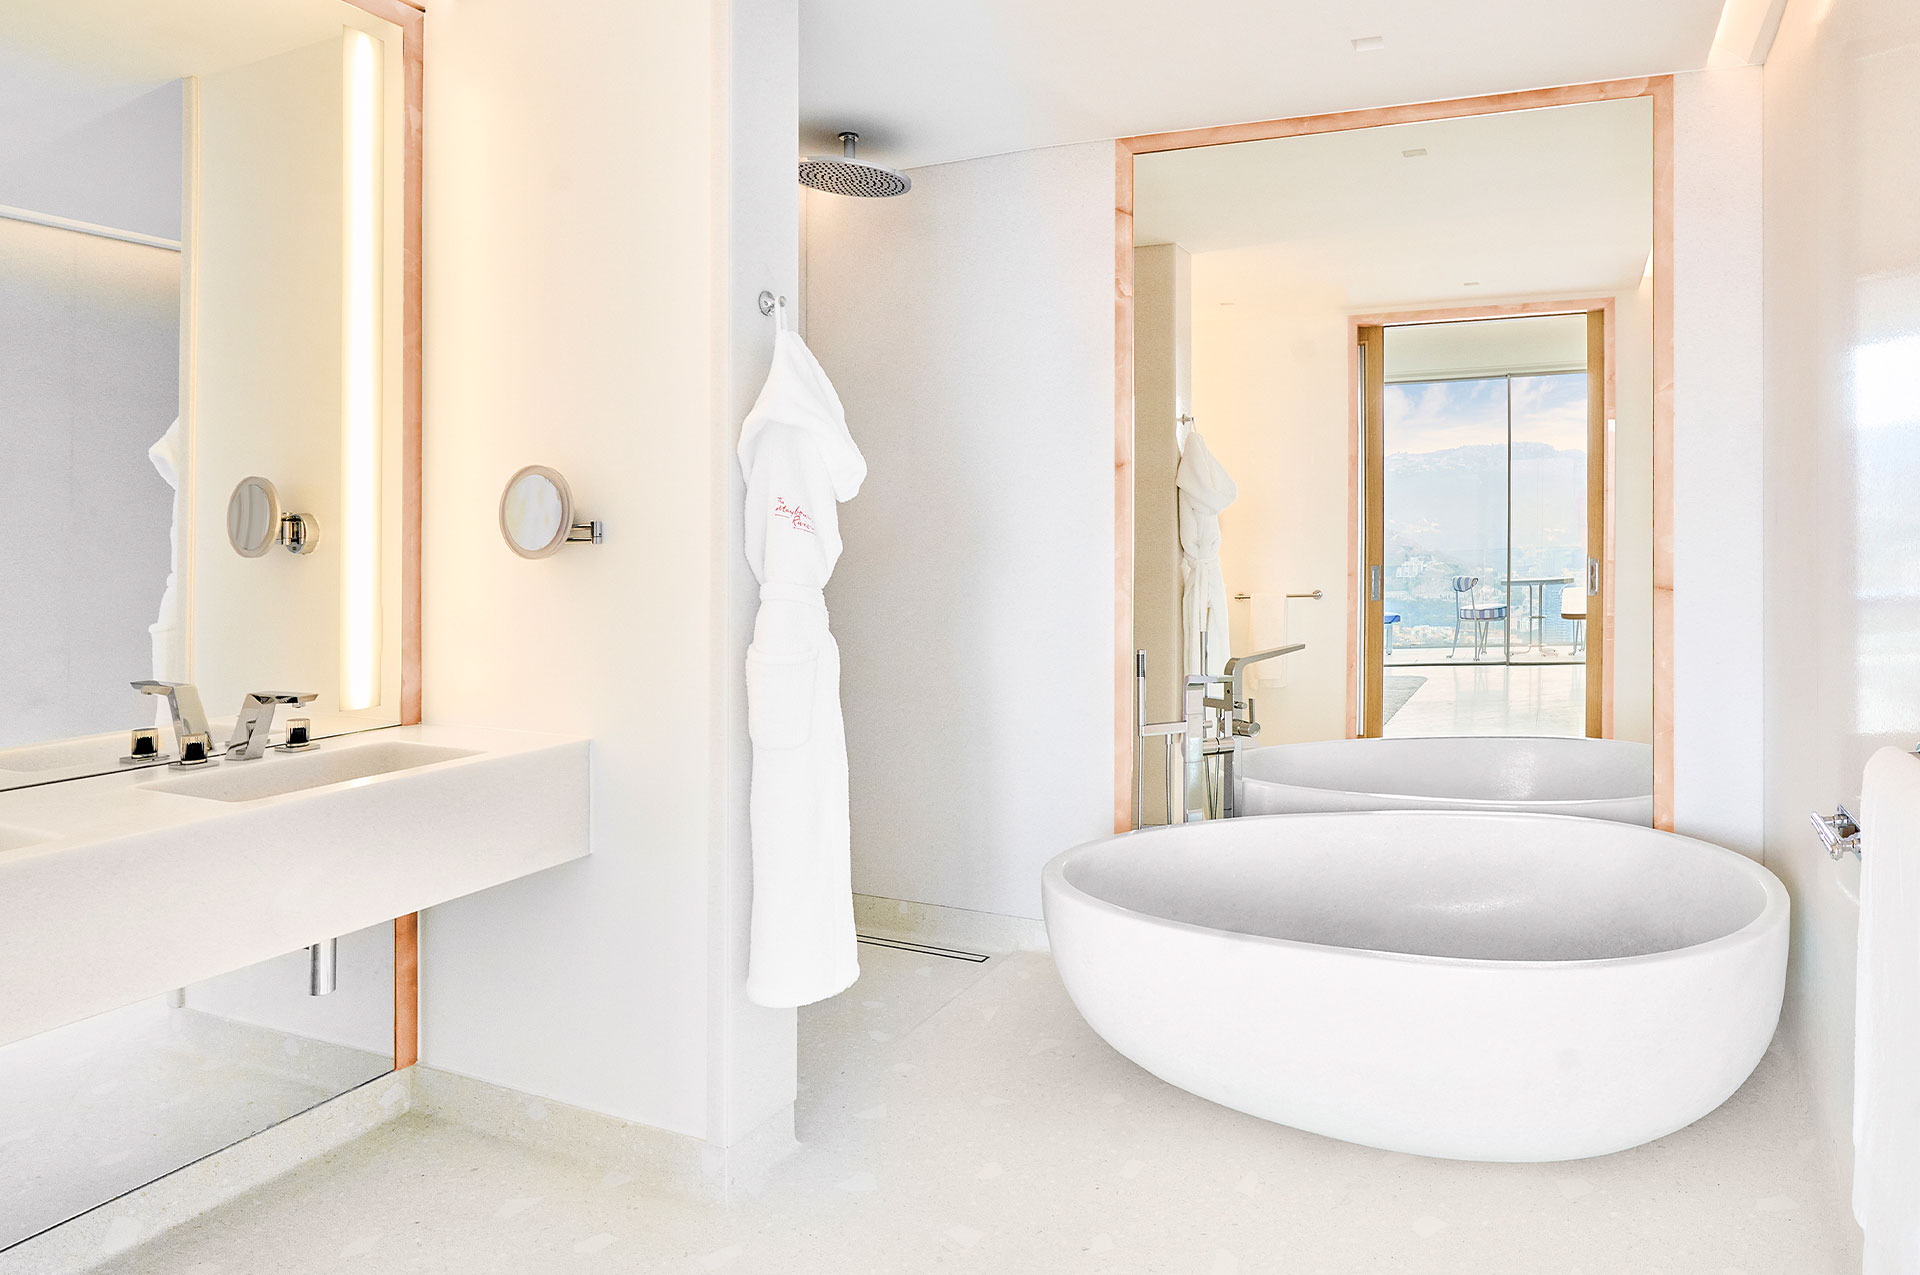 The wide curved bath sits in the centre of the modern Sea View Suite bathrooms, with branded Maybourne Riviera dressing robes hanging from the hooks beside the shower